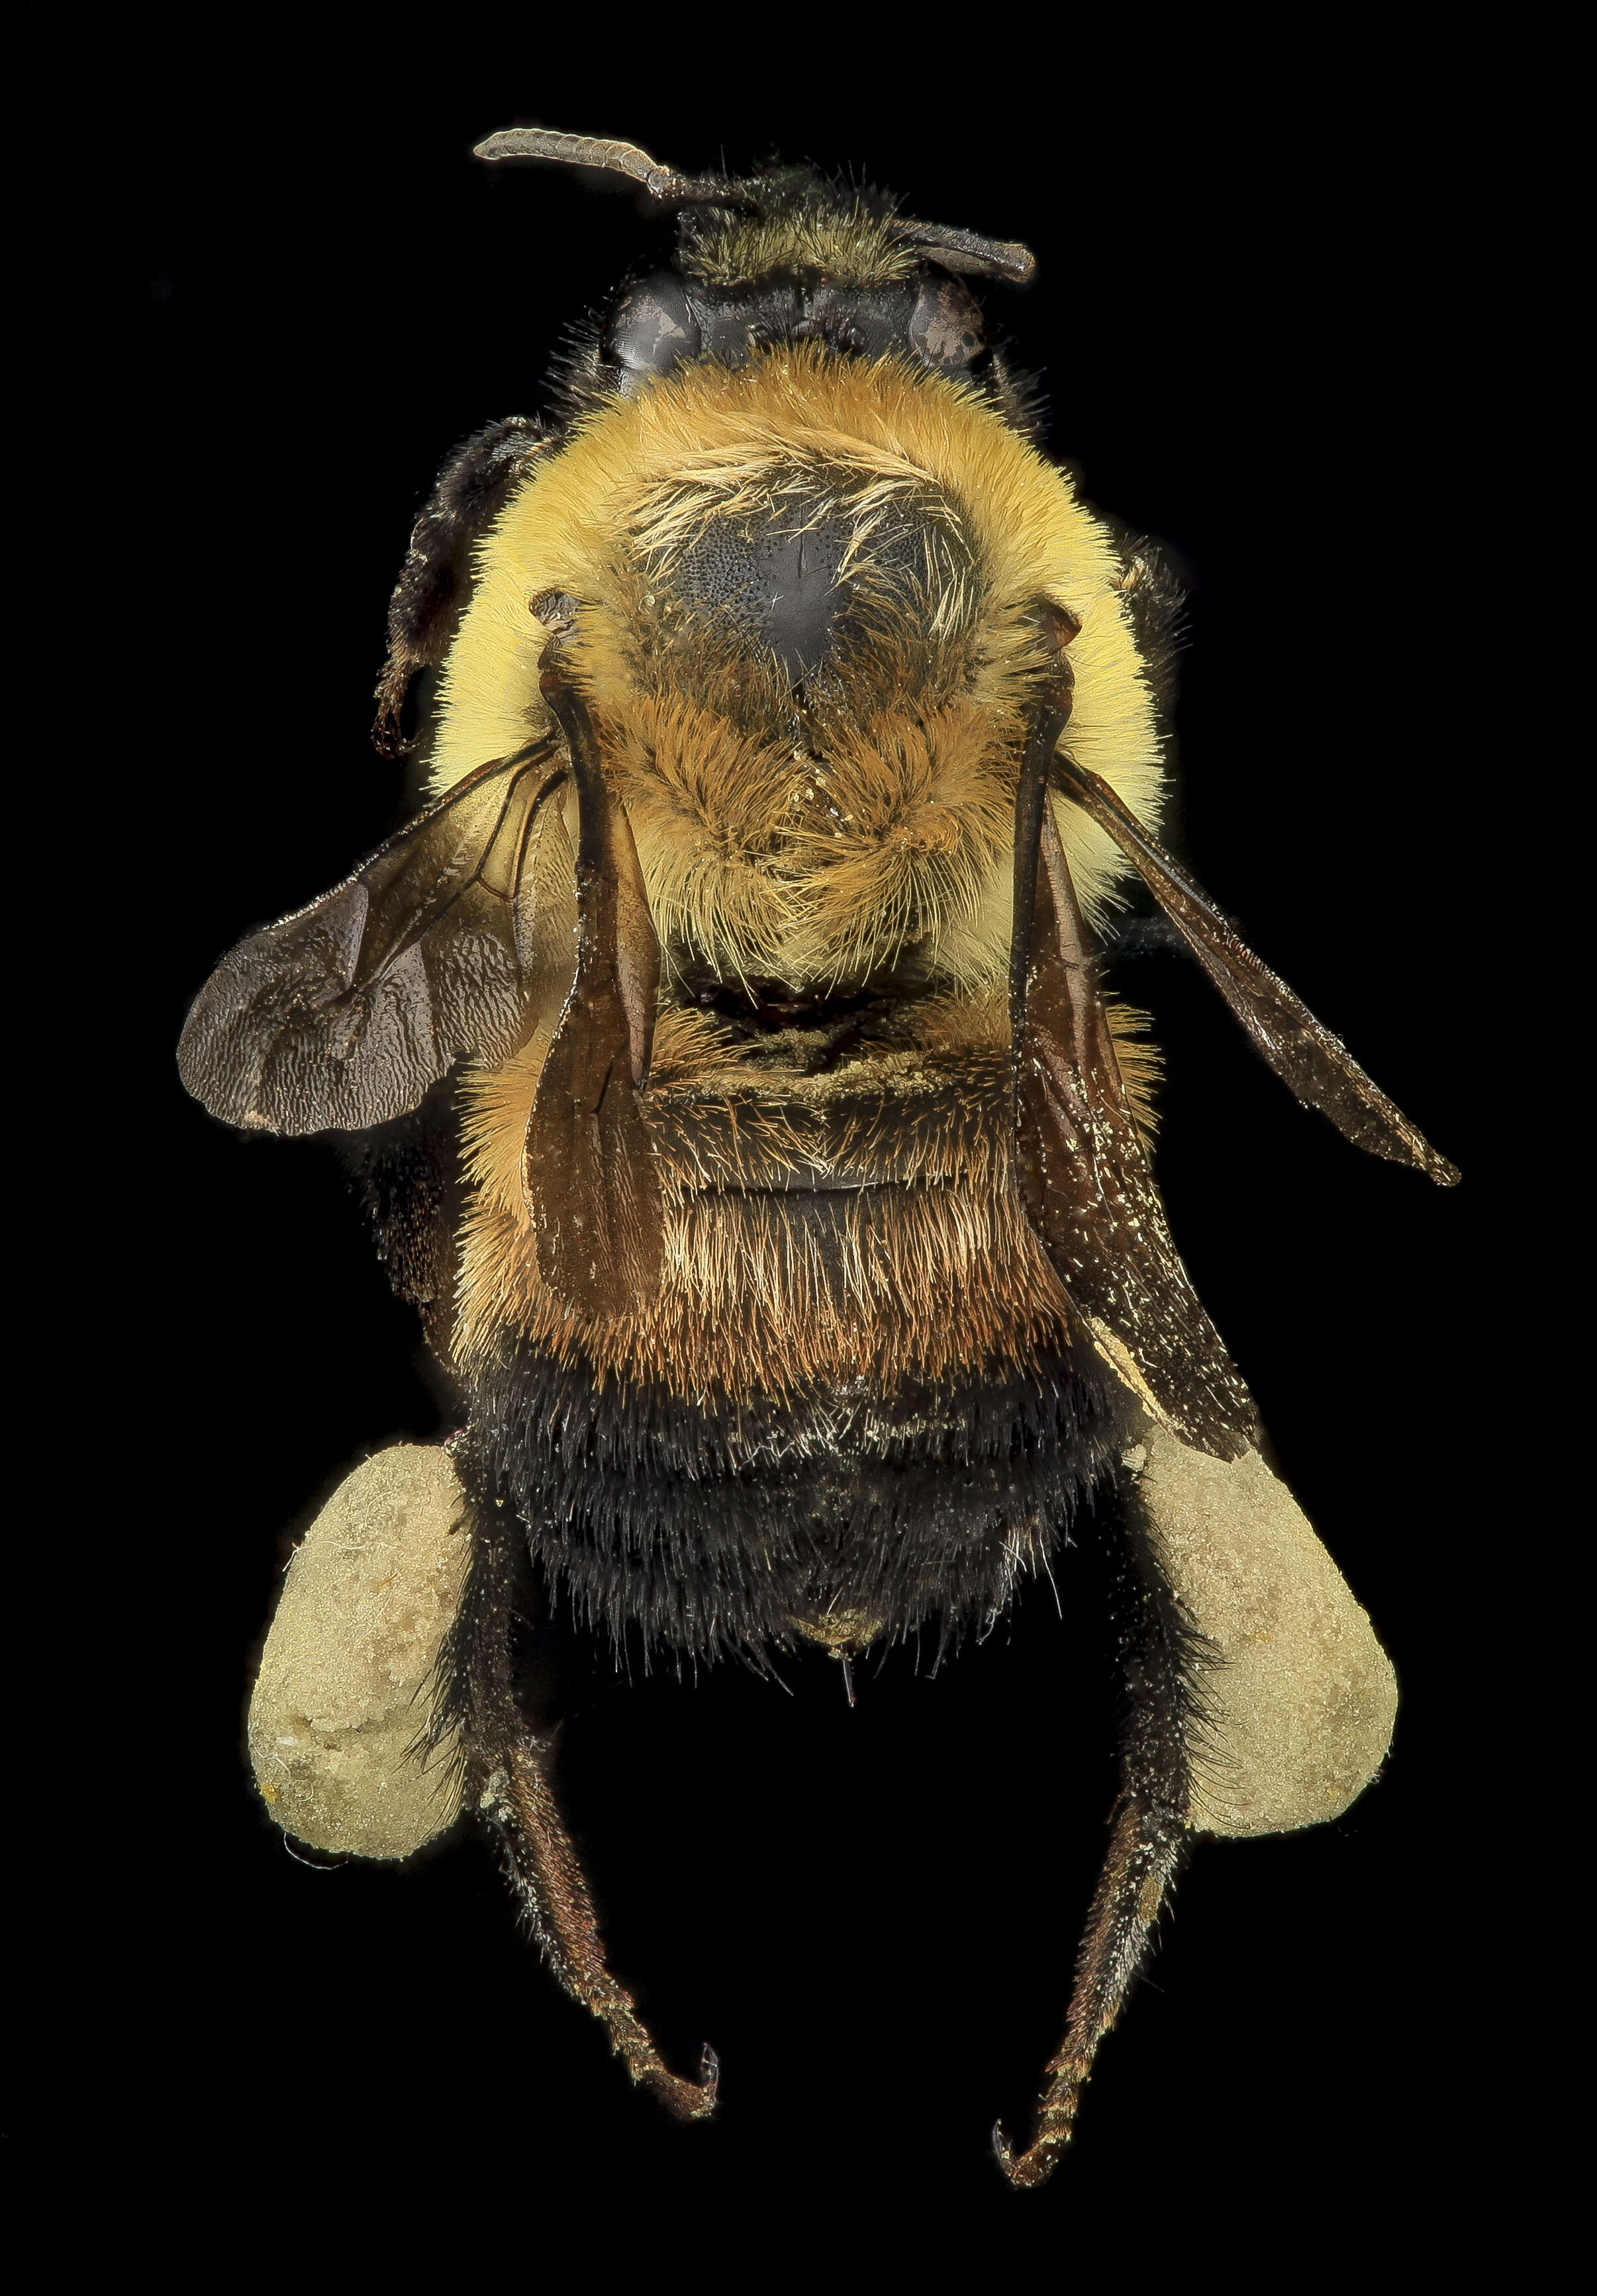 Image of Brown-belted Bumblebee